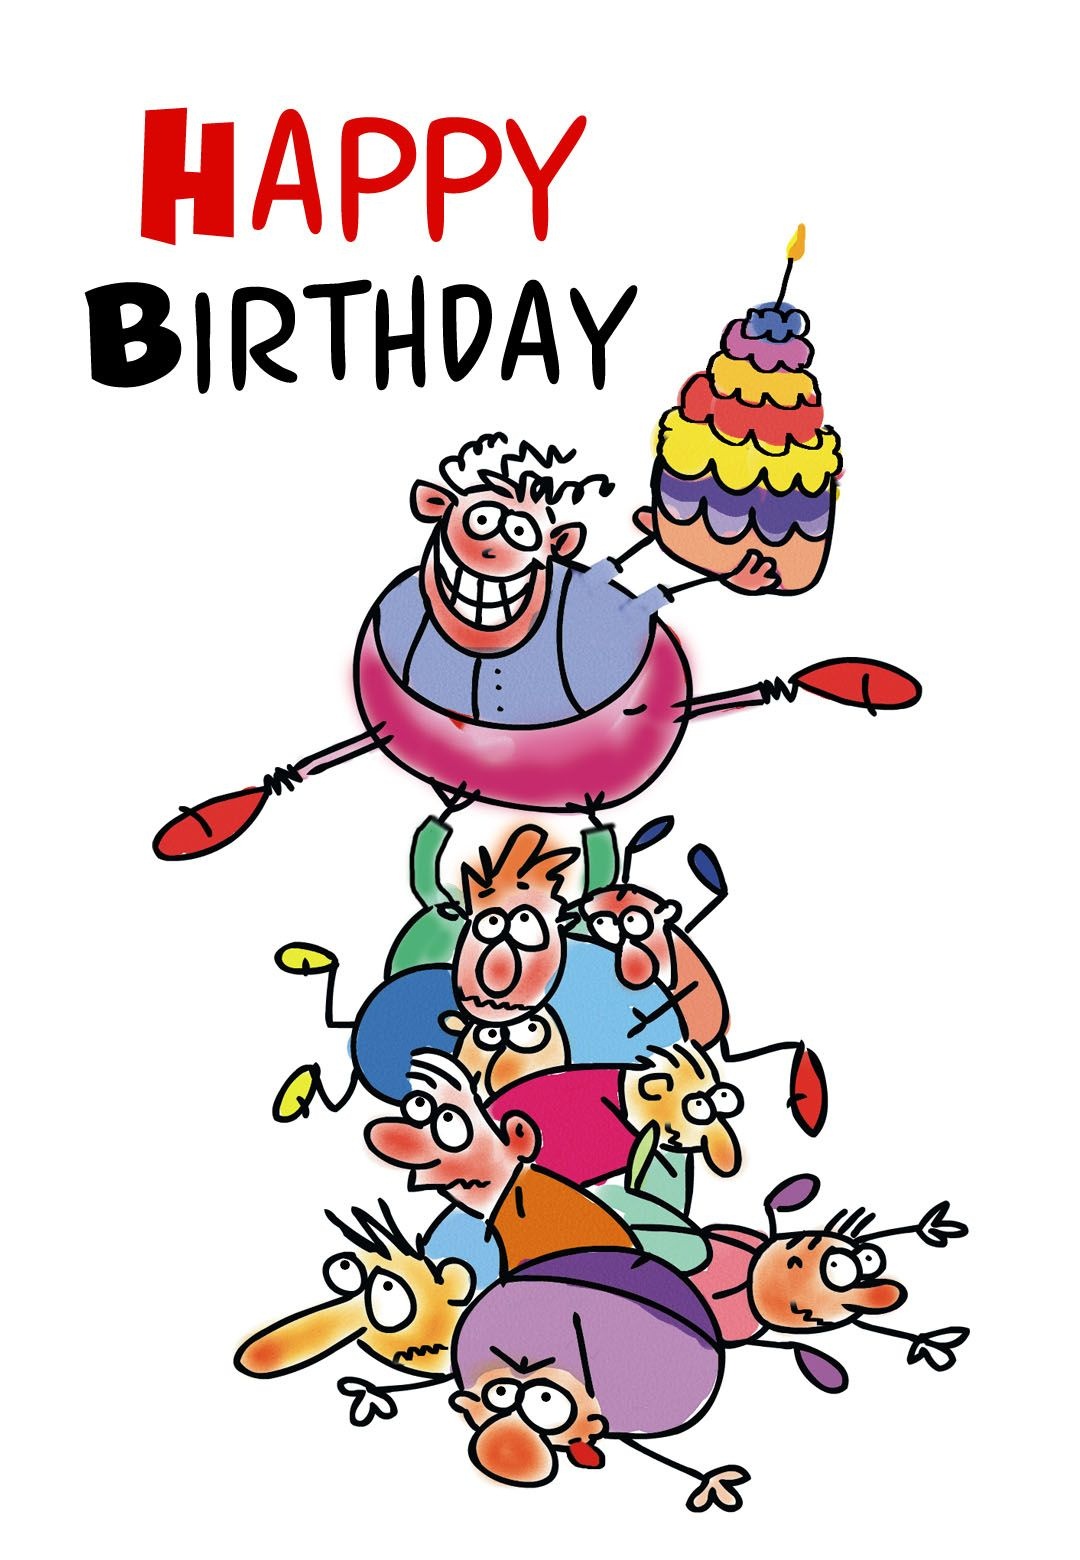 Free Printable Funny Birthday Greeting Card | Gifts To Make | Free - Free Printable Funny Birthday Cards For Dad